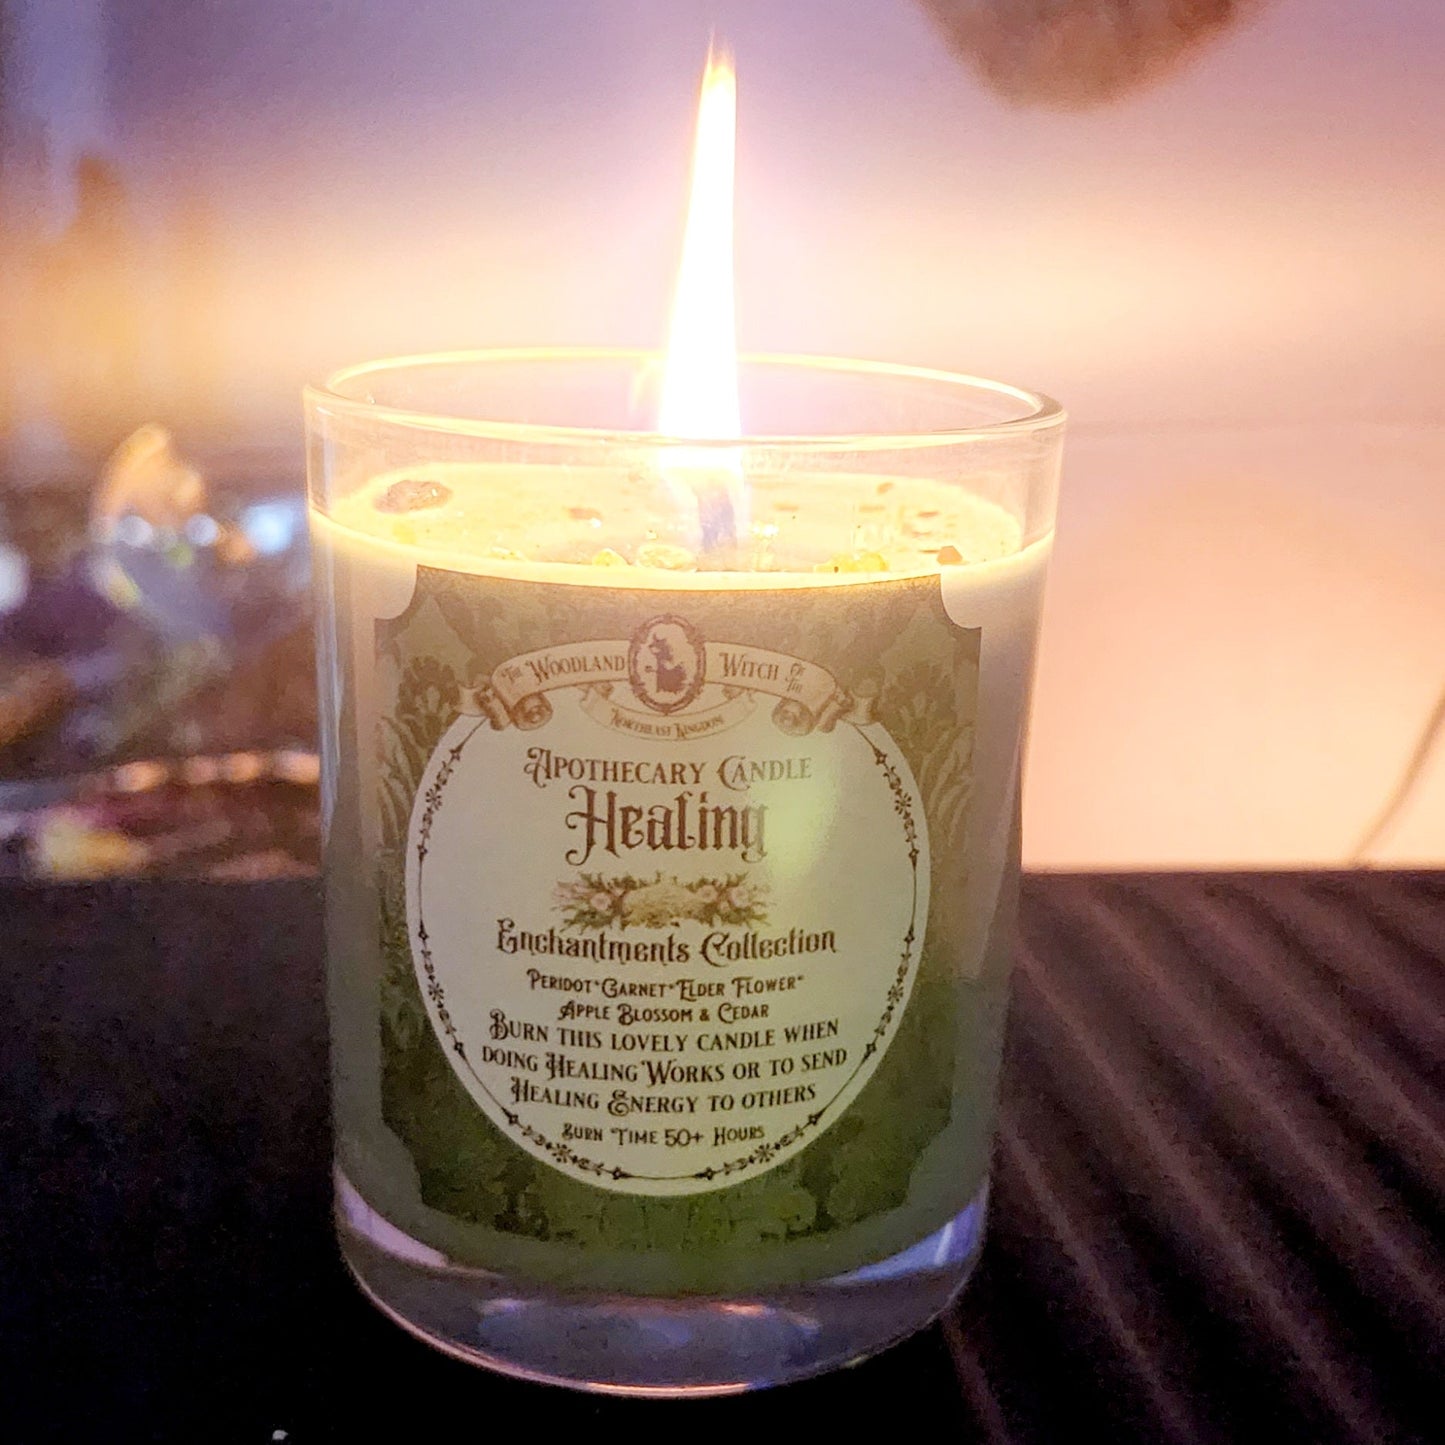 HEALING APOTHECARY CANDLE for Emotional & Physical Healing Woodland Witchcraft